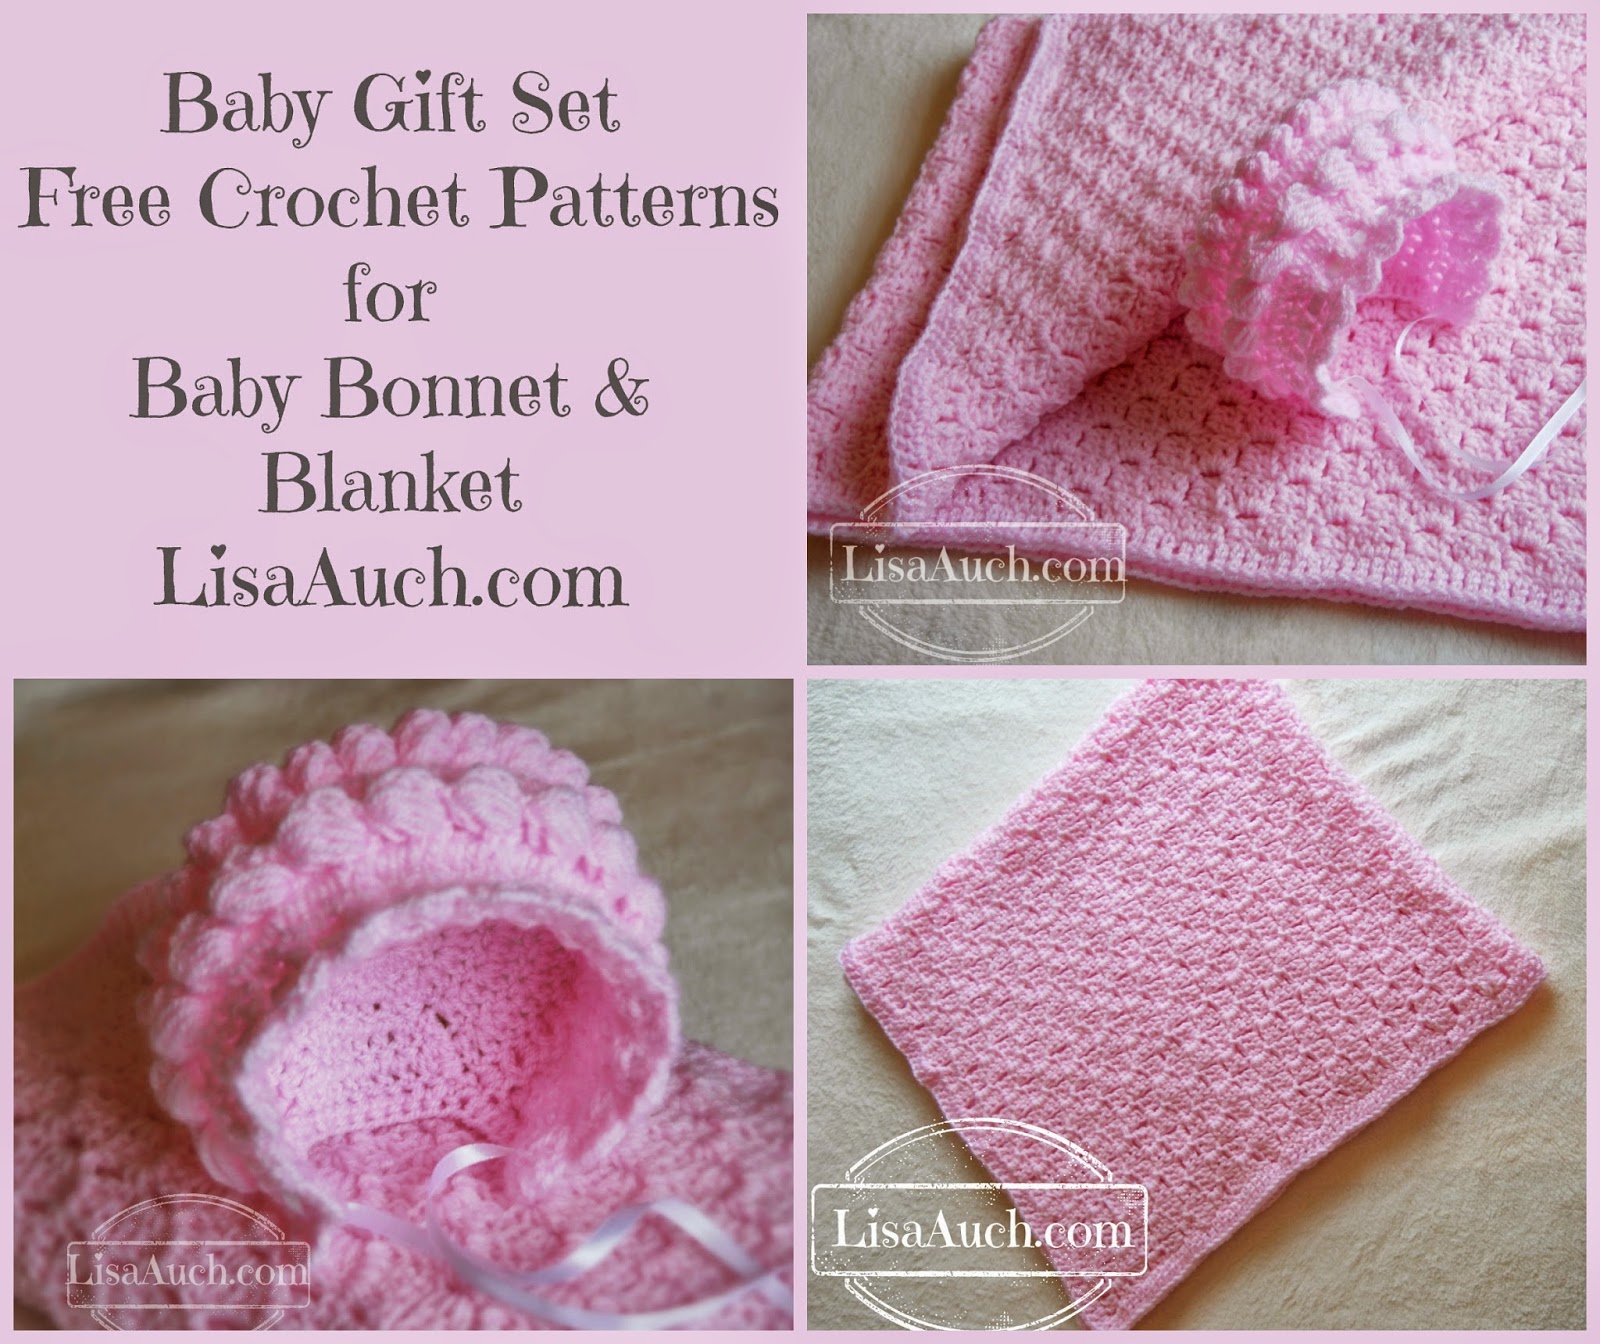 Crochet Bonnet and Blanket Patterns Ideal Gift set for a New baby